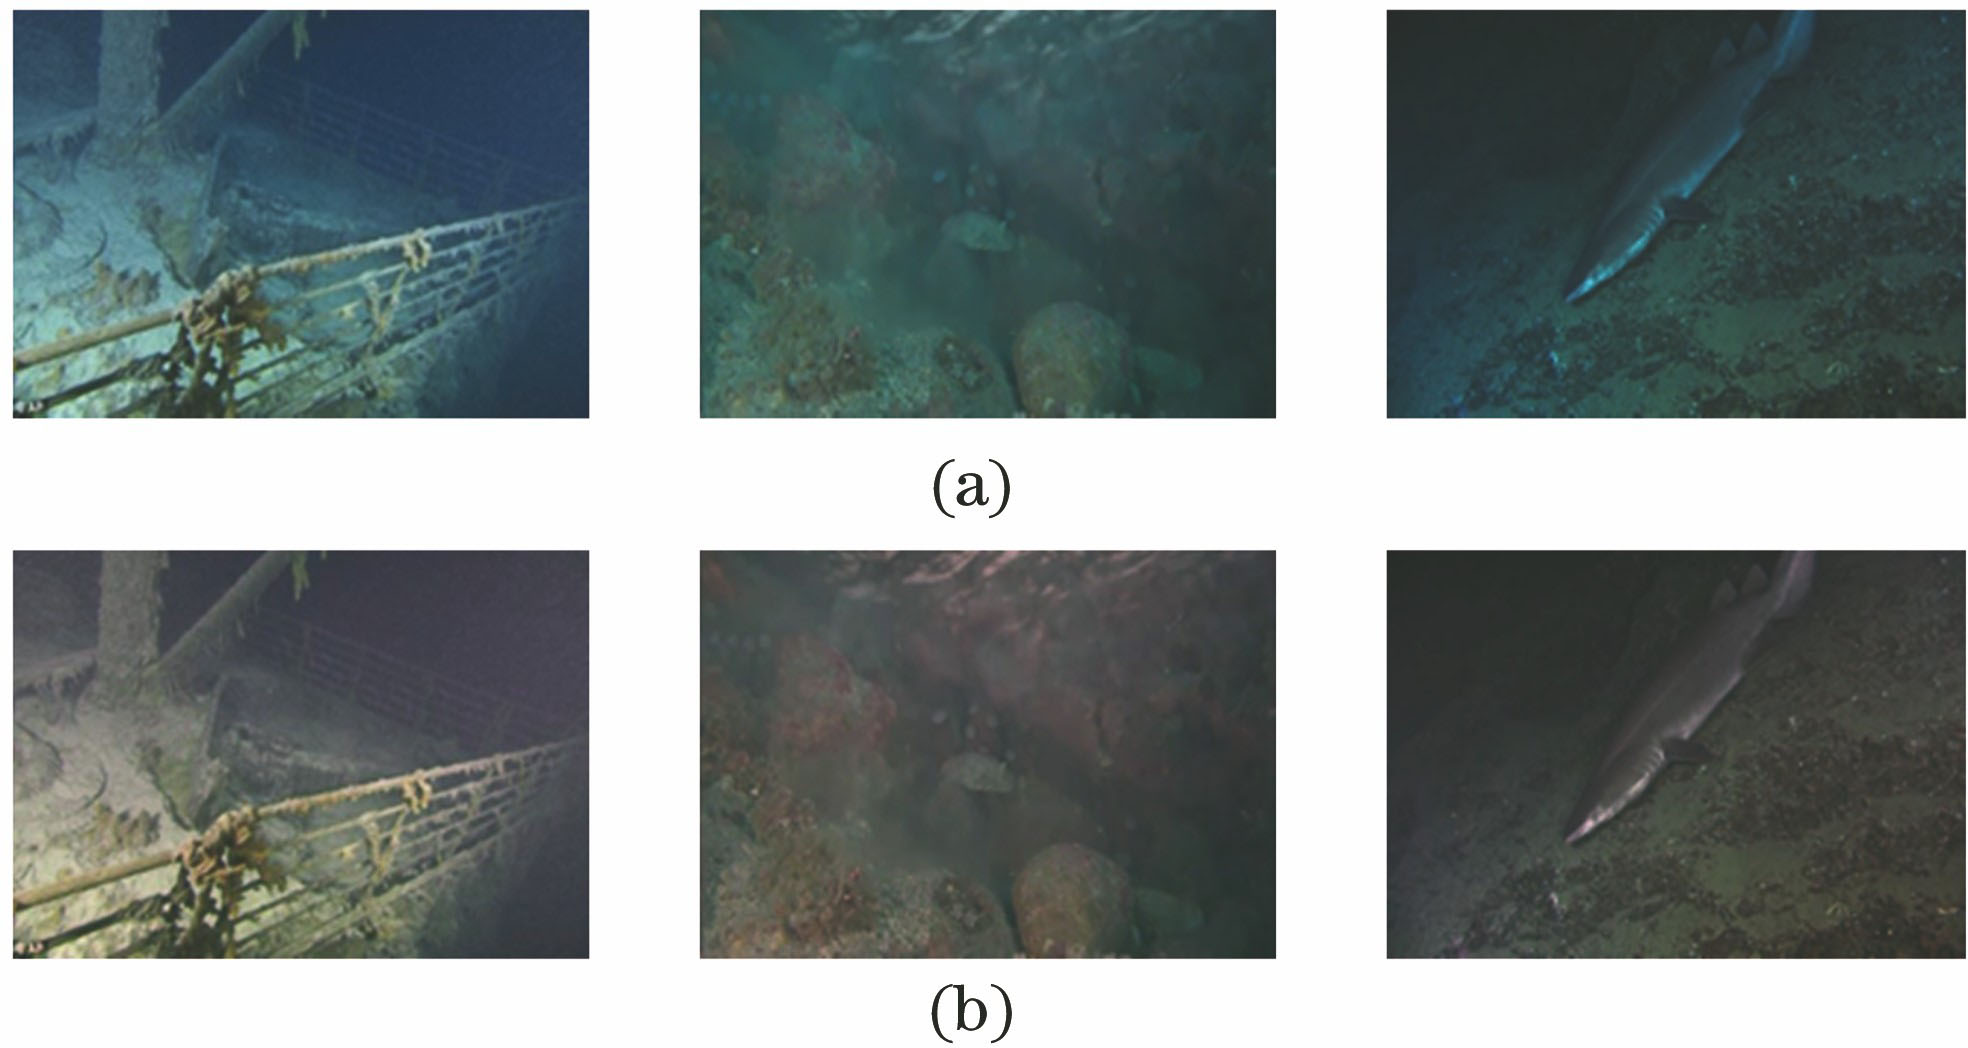 Color correction results of low illumination underwater images. (a) Low illumination underwater images; (b) color correction results